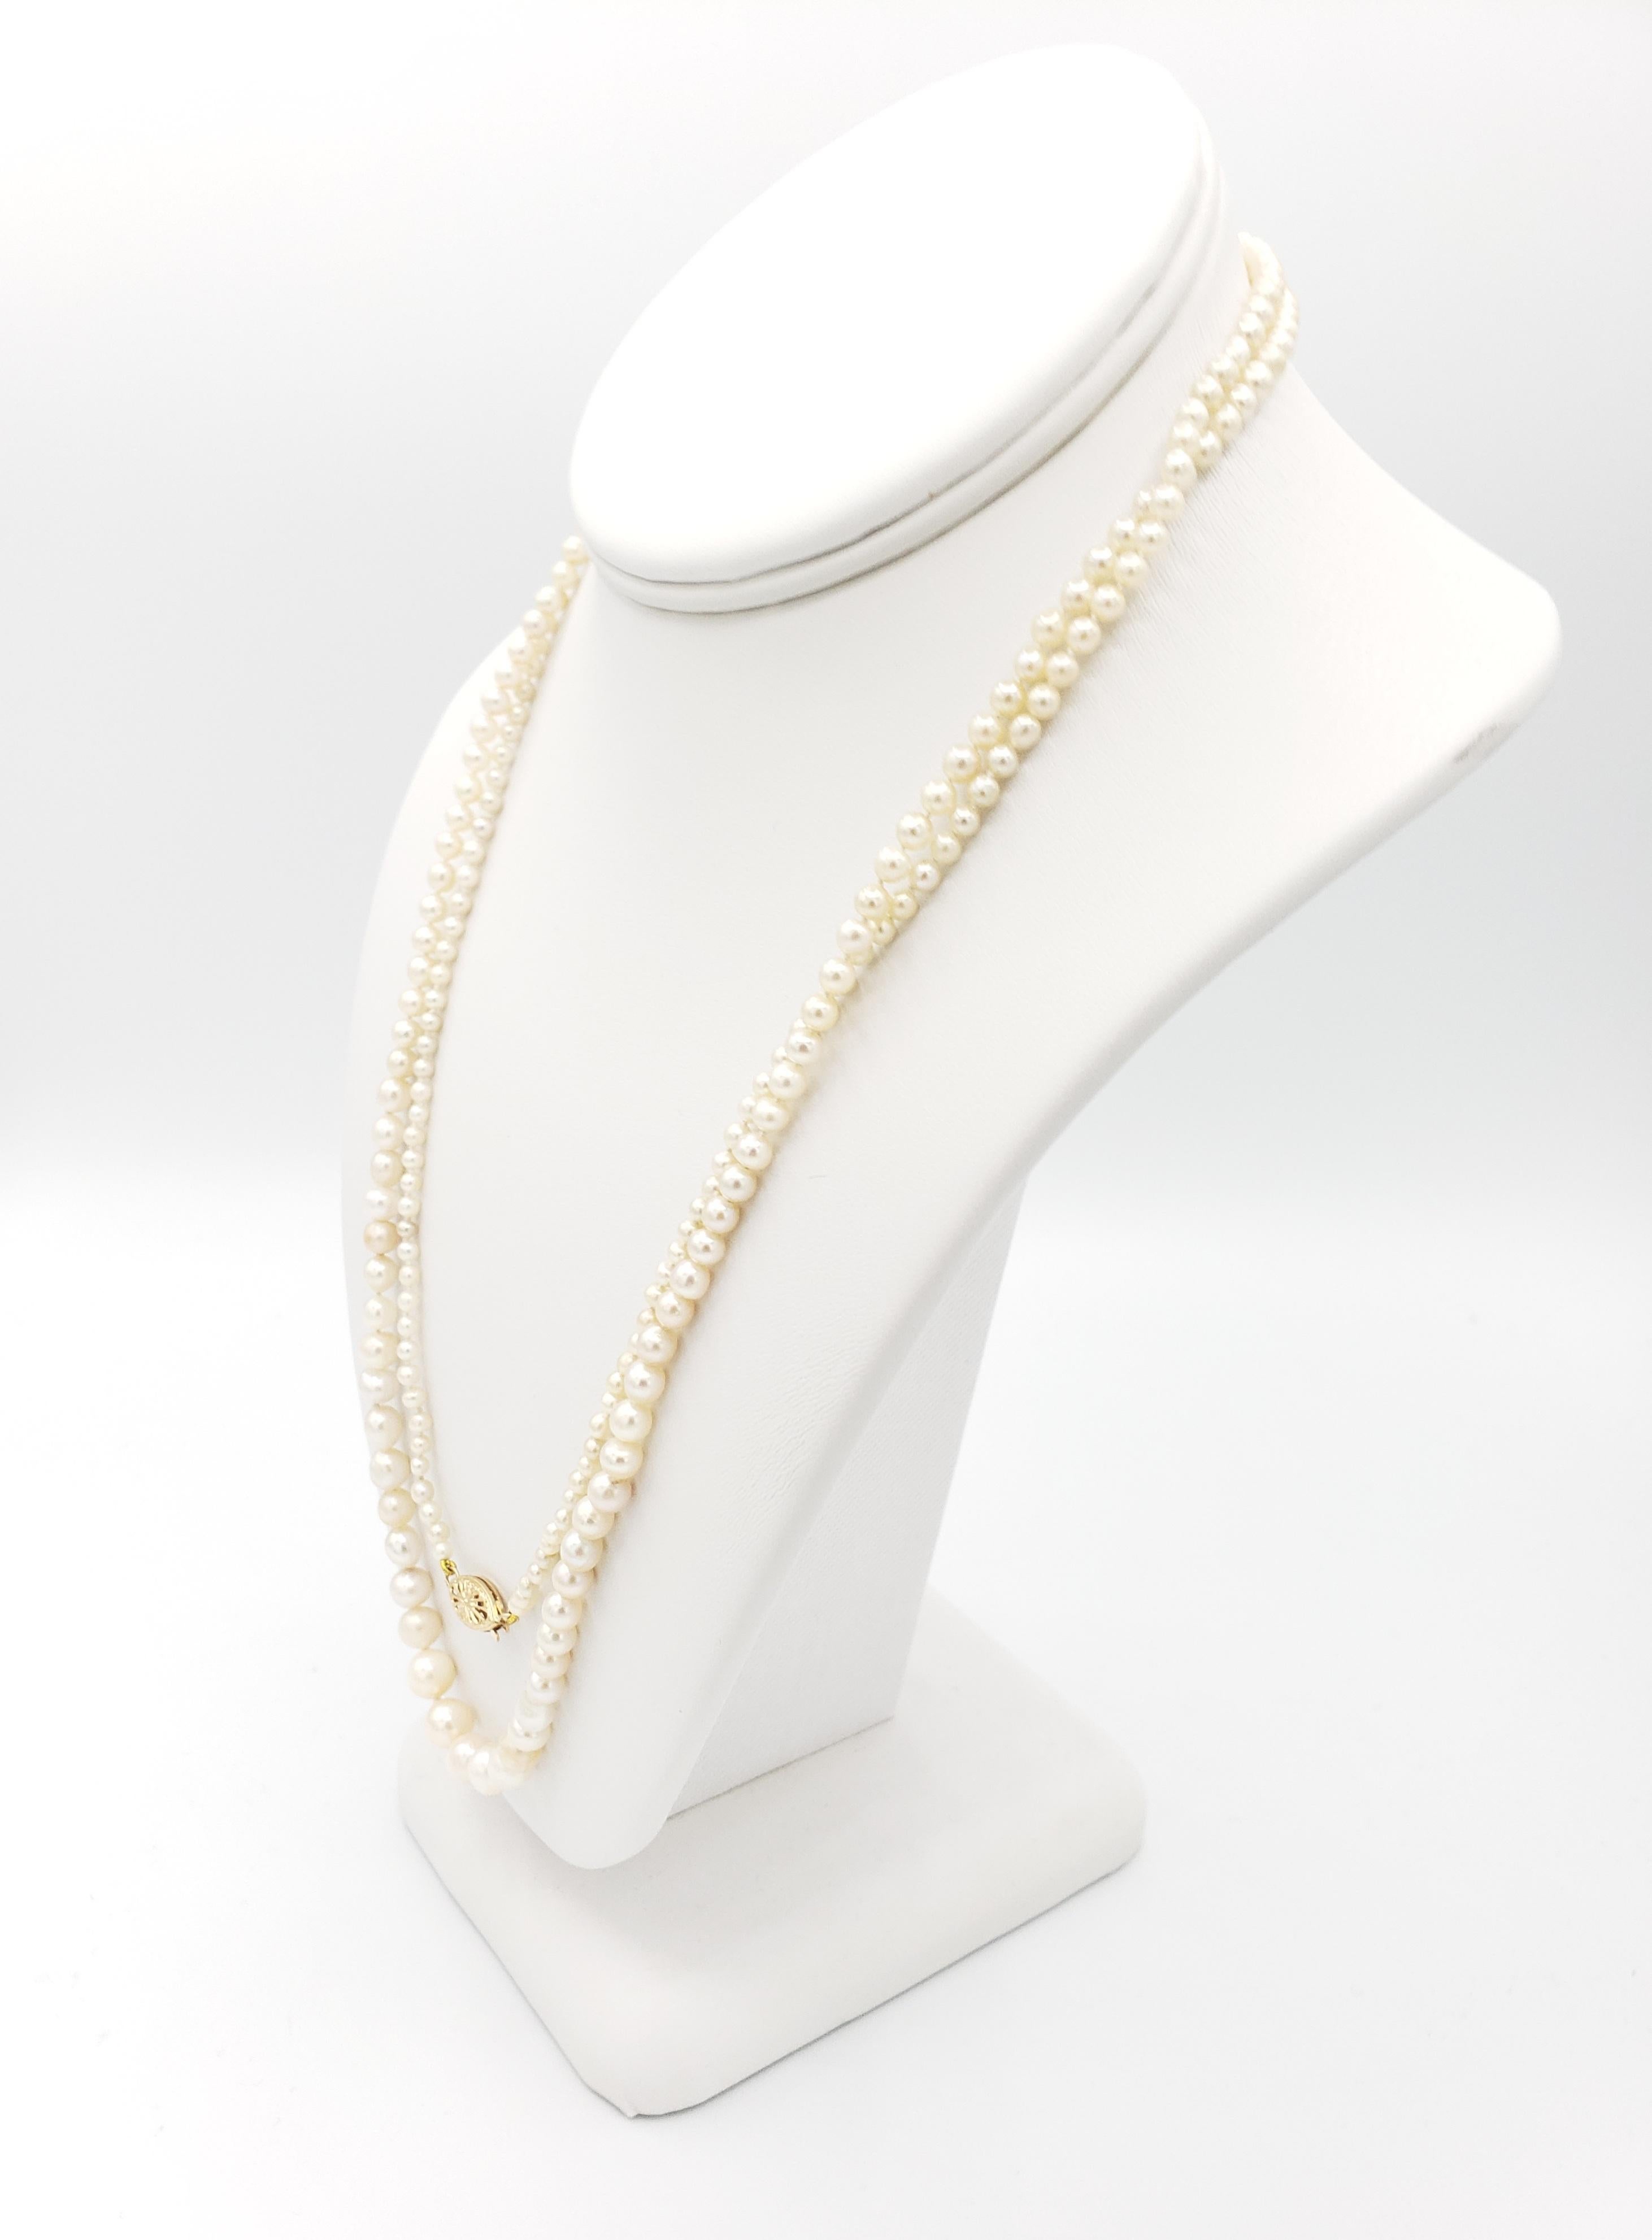 saltwater cultured pearls